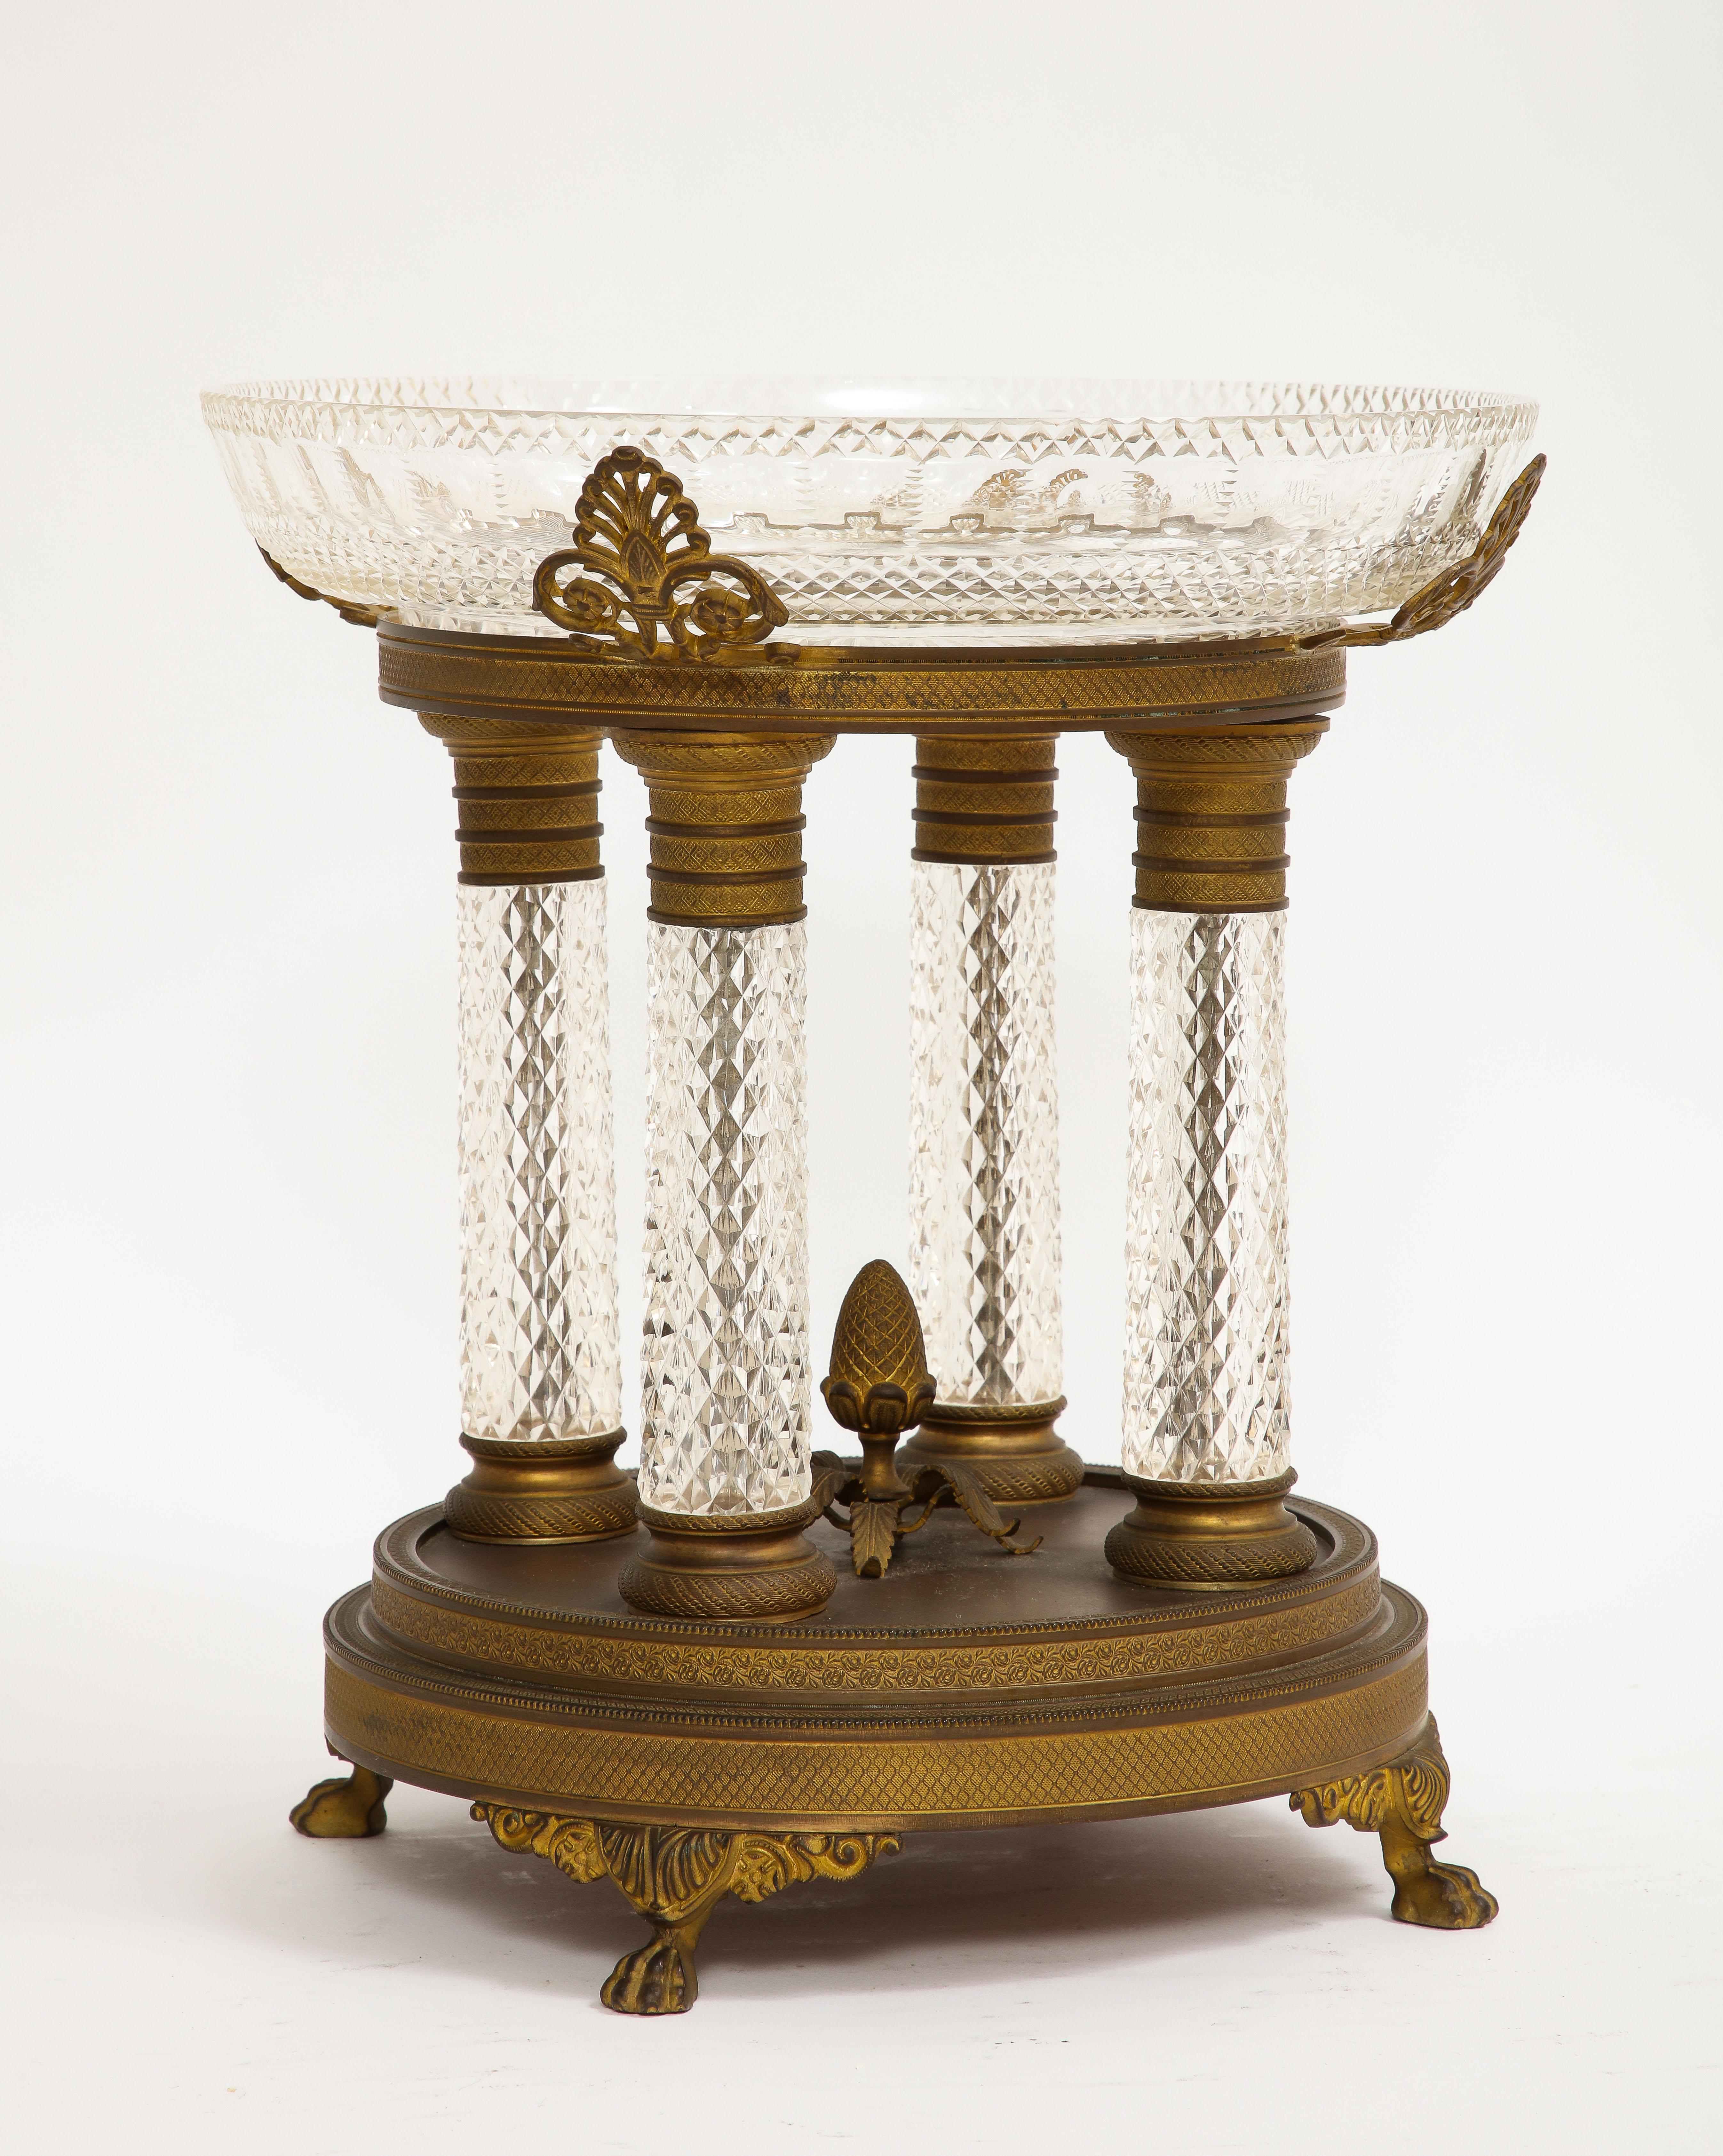 19th Century French Baccarat Ormolu Mounted Crystal Centerpiece For Sale 1